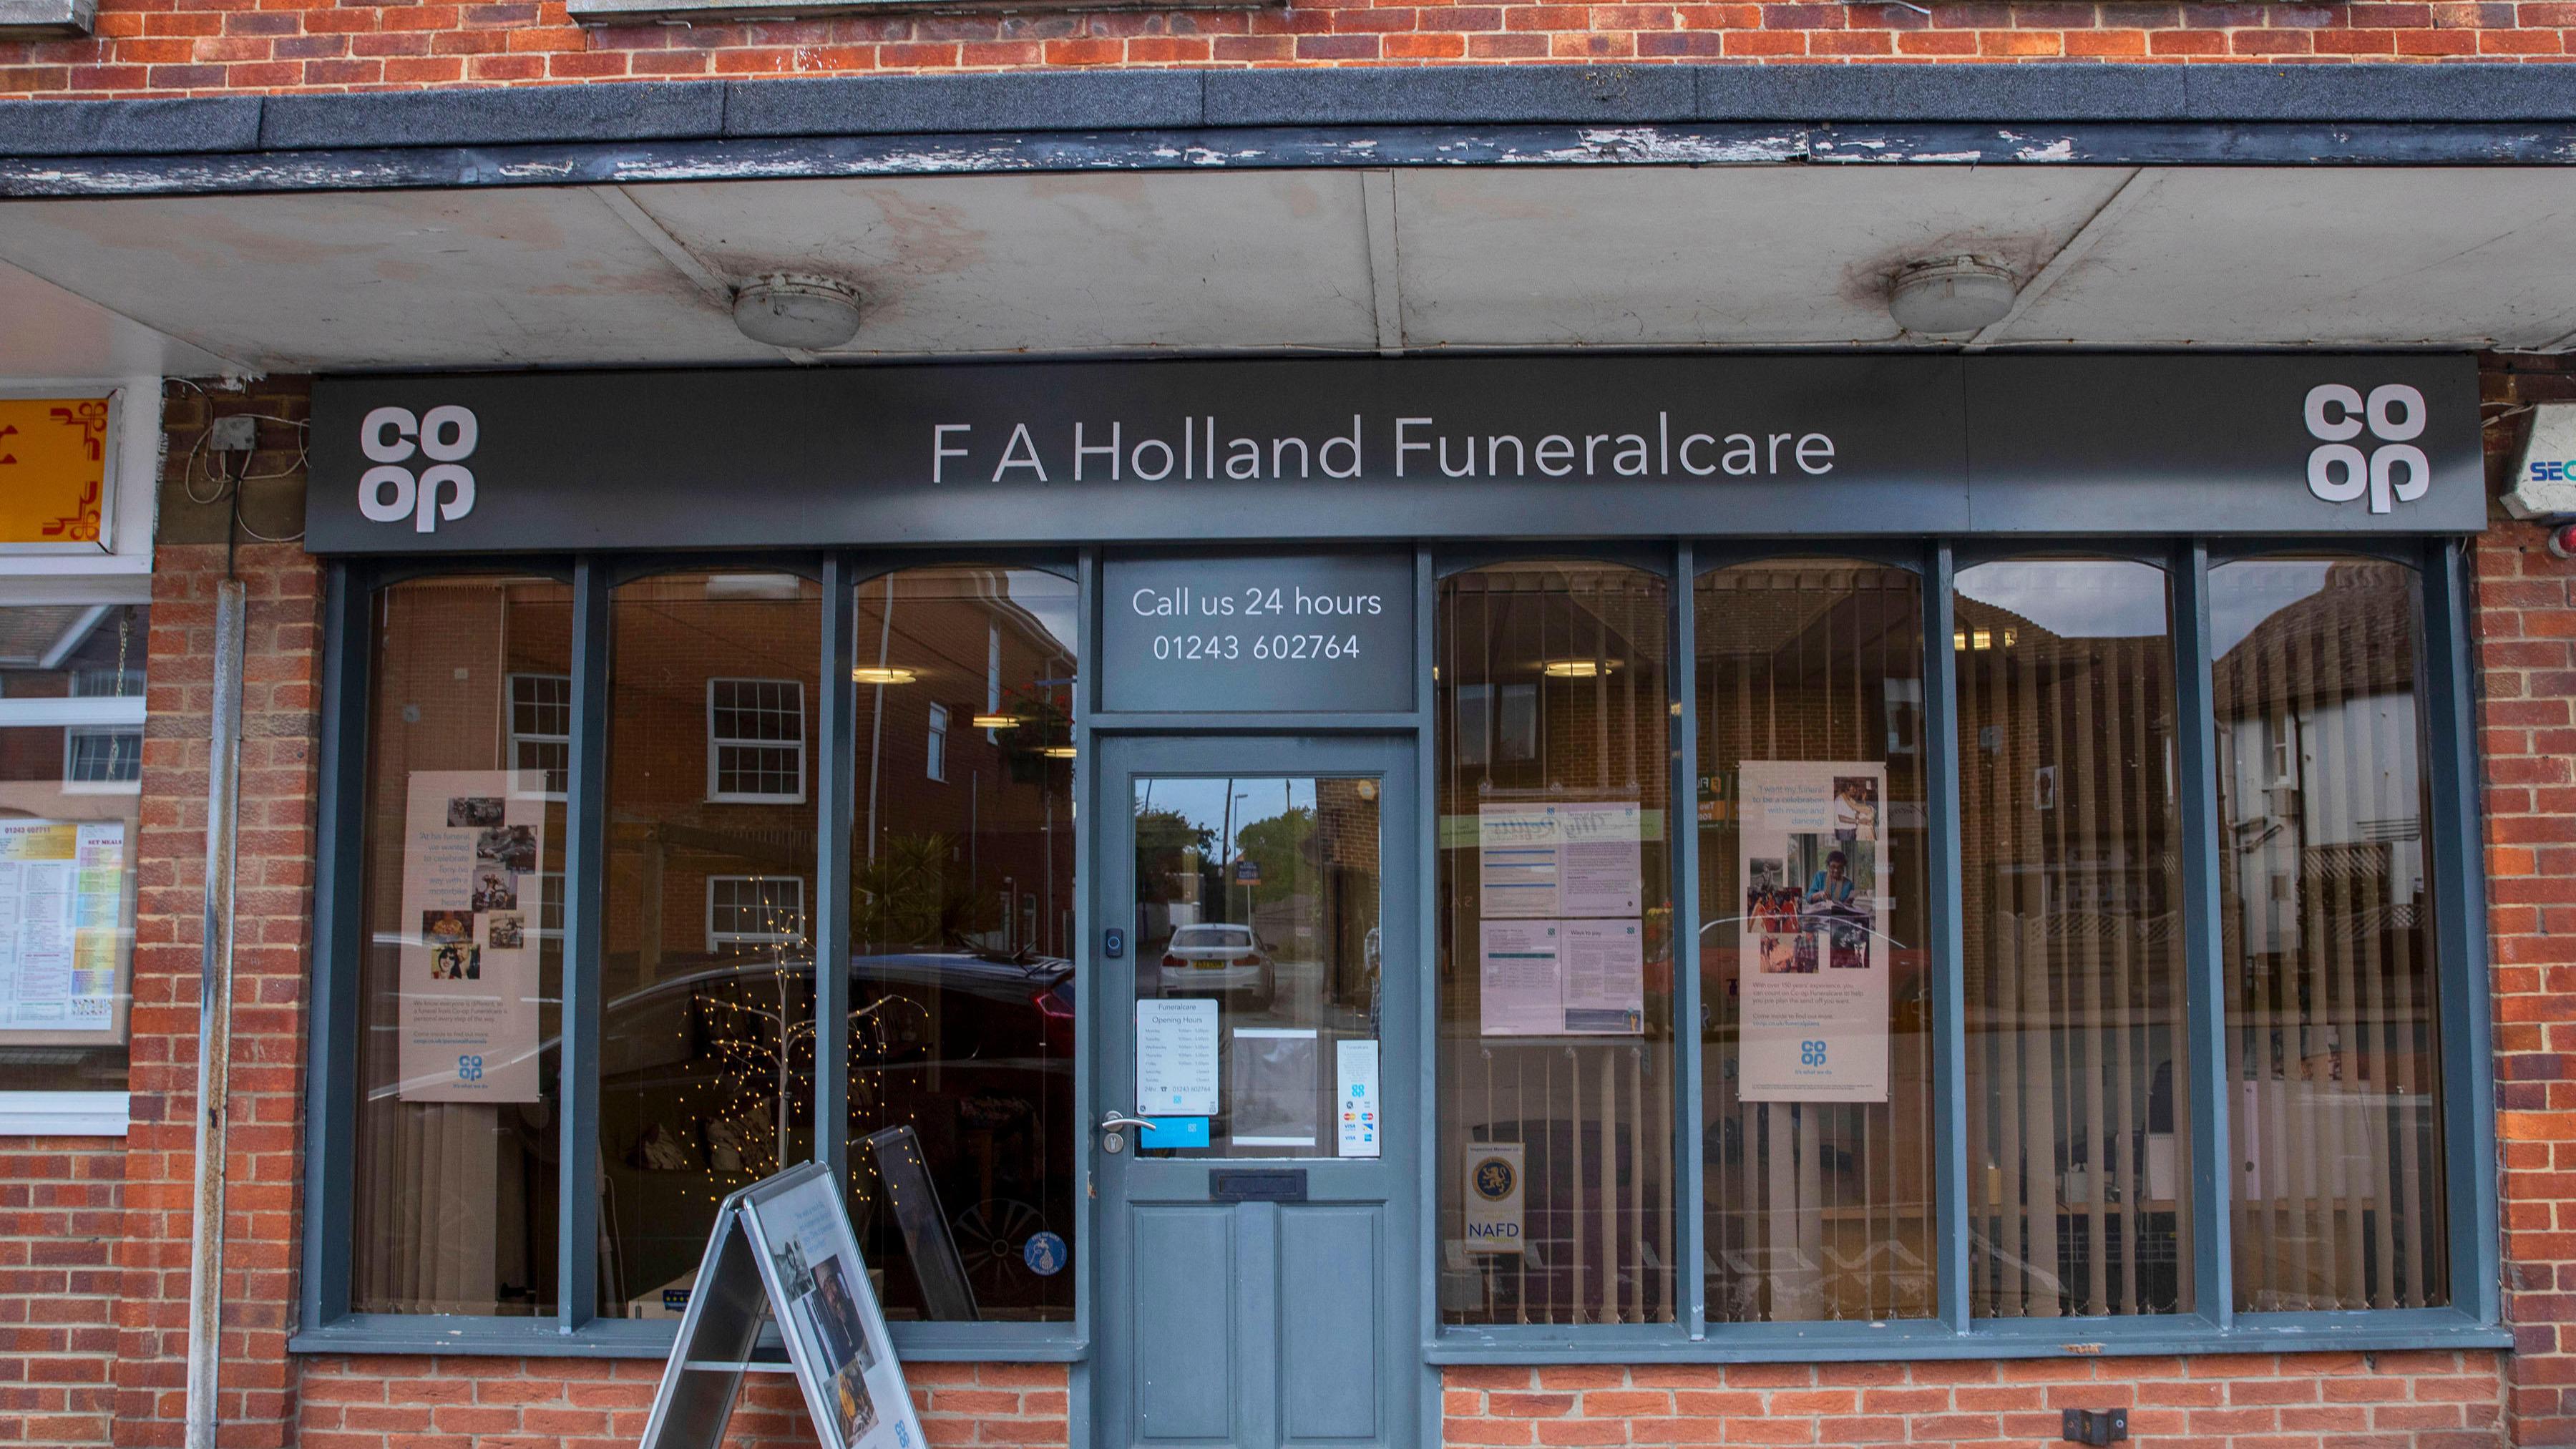 FA Holland Funeralcare Selsey F A Holland & Son Funeralcare Chichester 01243 602764